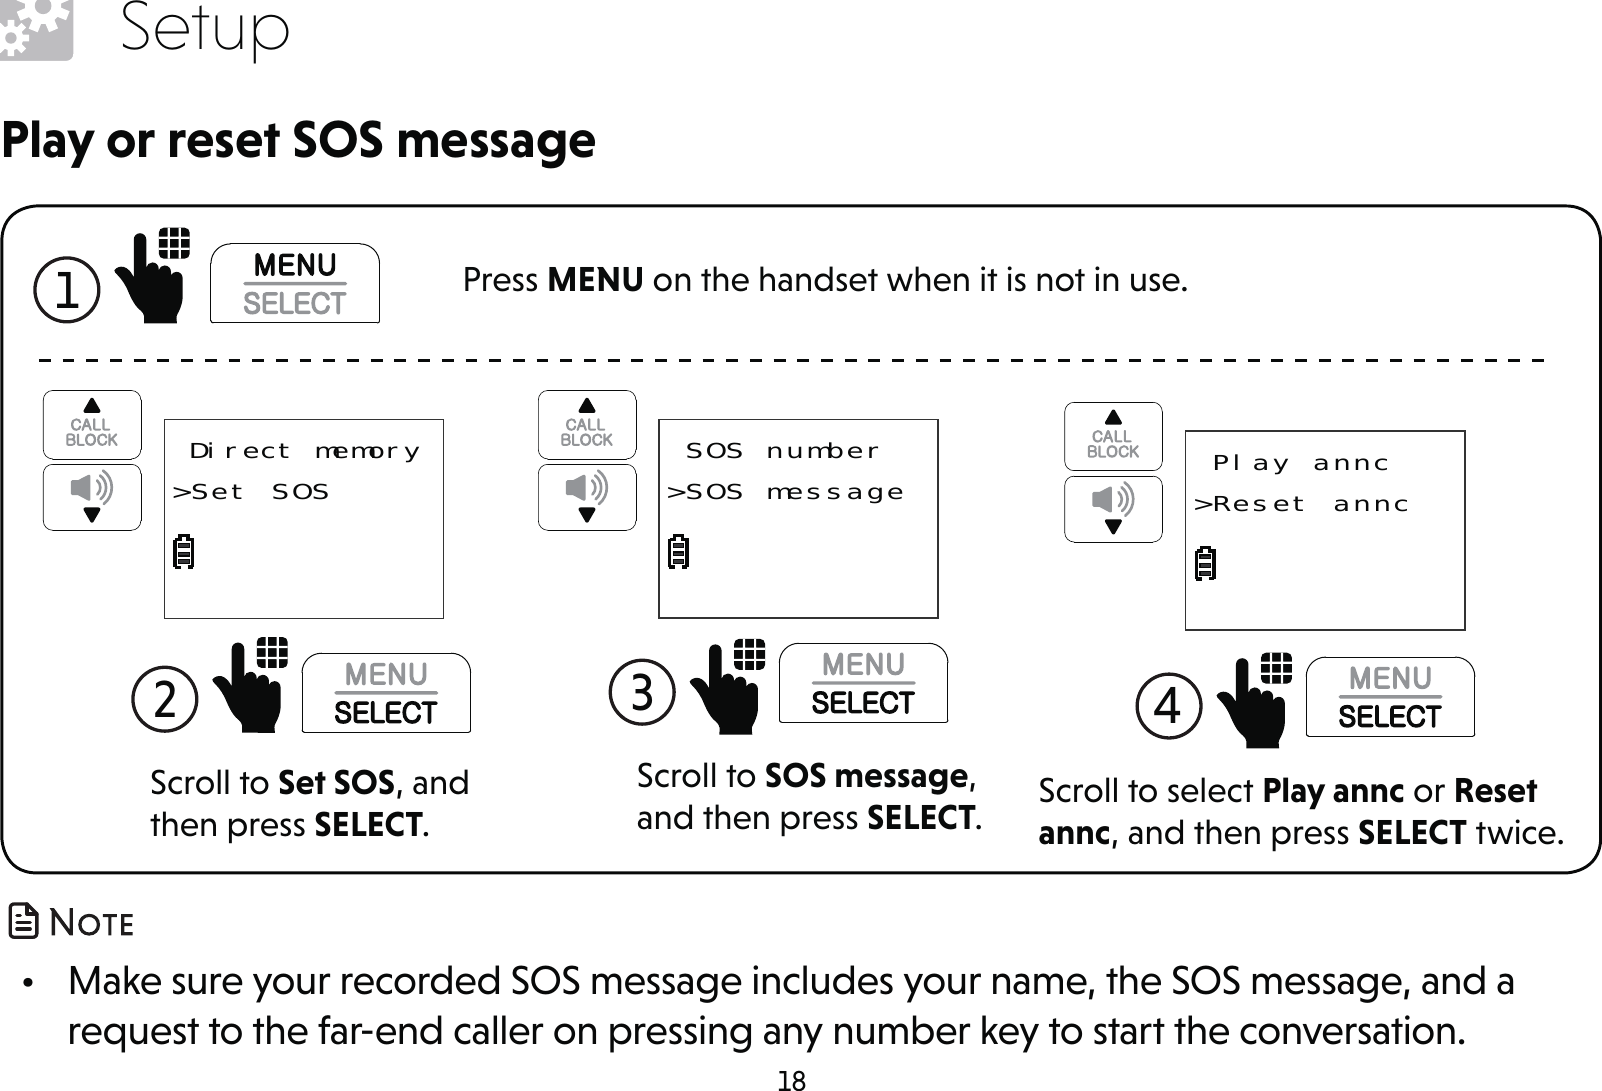 18Setup •  Make sure your recorded SOS message includes your name, the SOS message, and a request to the far-end caller on pressing any number key to start the conversation.1  Press MENU on the handset when it is not in use.Scroll to SOS message, and then press SELECT.3  SOS number&gt;SOS messageScroll to select Play annc or Reset annc, and then press SELECT twice.4   Play annc&gt;Reset anncPlay or reset SOS messageScroll to Set SOS, and then press SELECT.2   Direct memory&gt;Set SOS